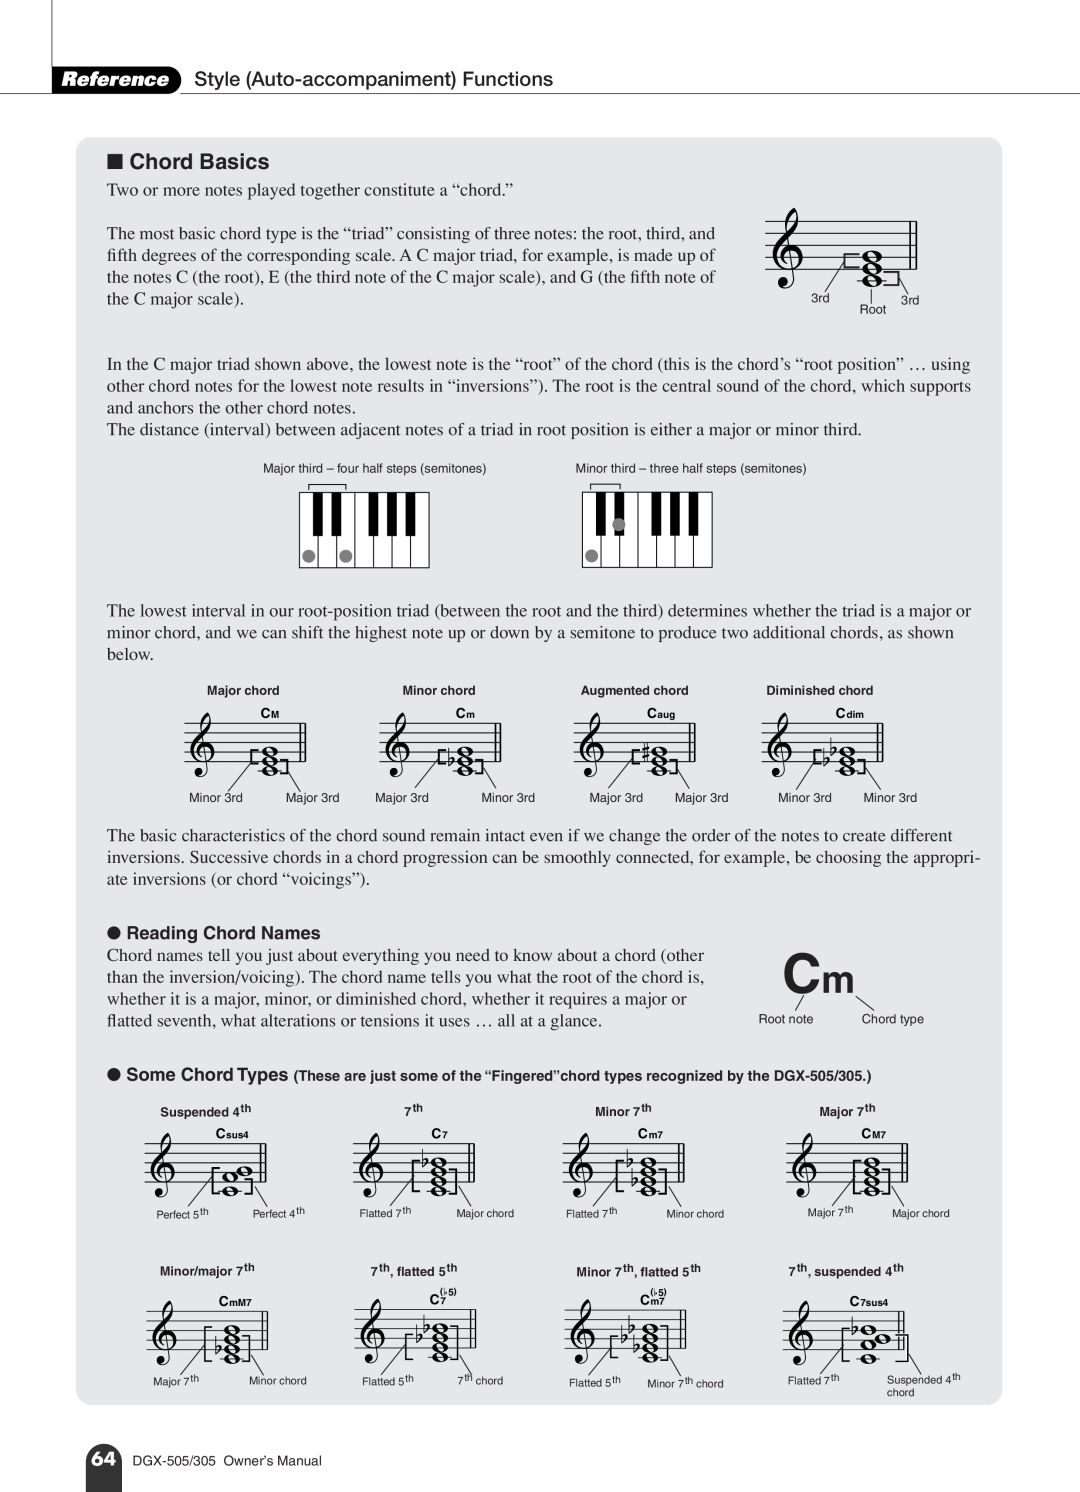 Yamaha DGX-505, DGX-305 Chord Basics, Reference Style Auto-accompaniment Functions, the C major scale, Reading Chord Names 